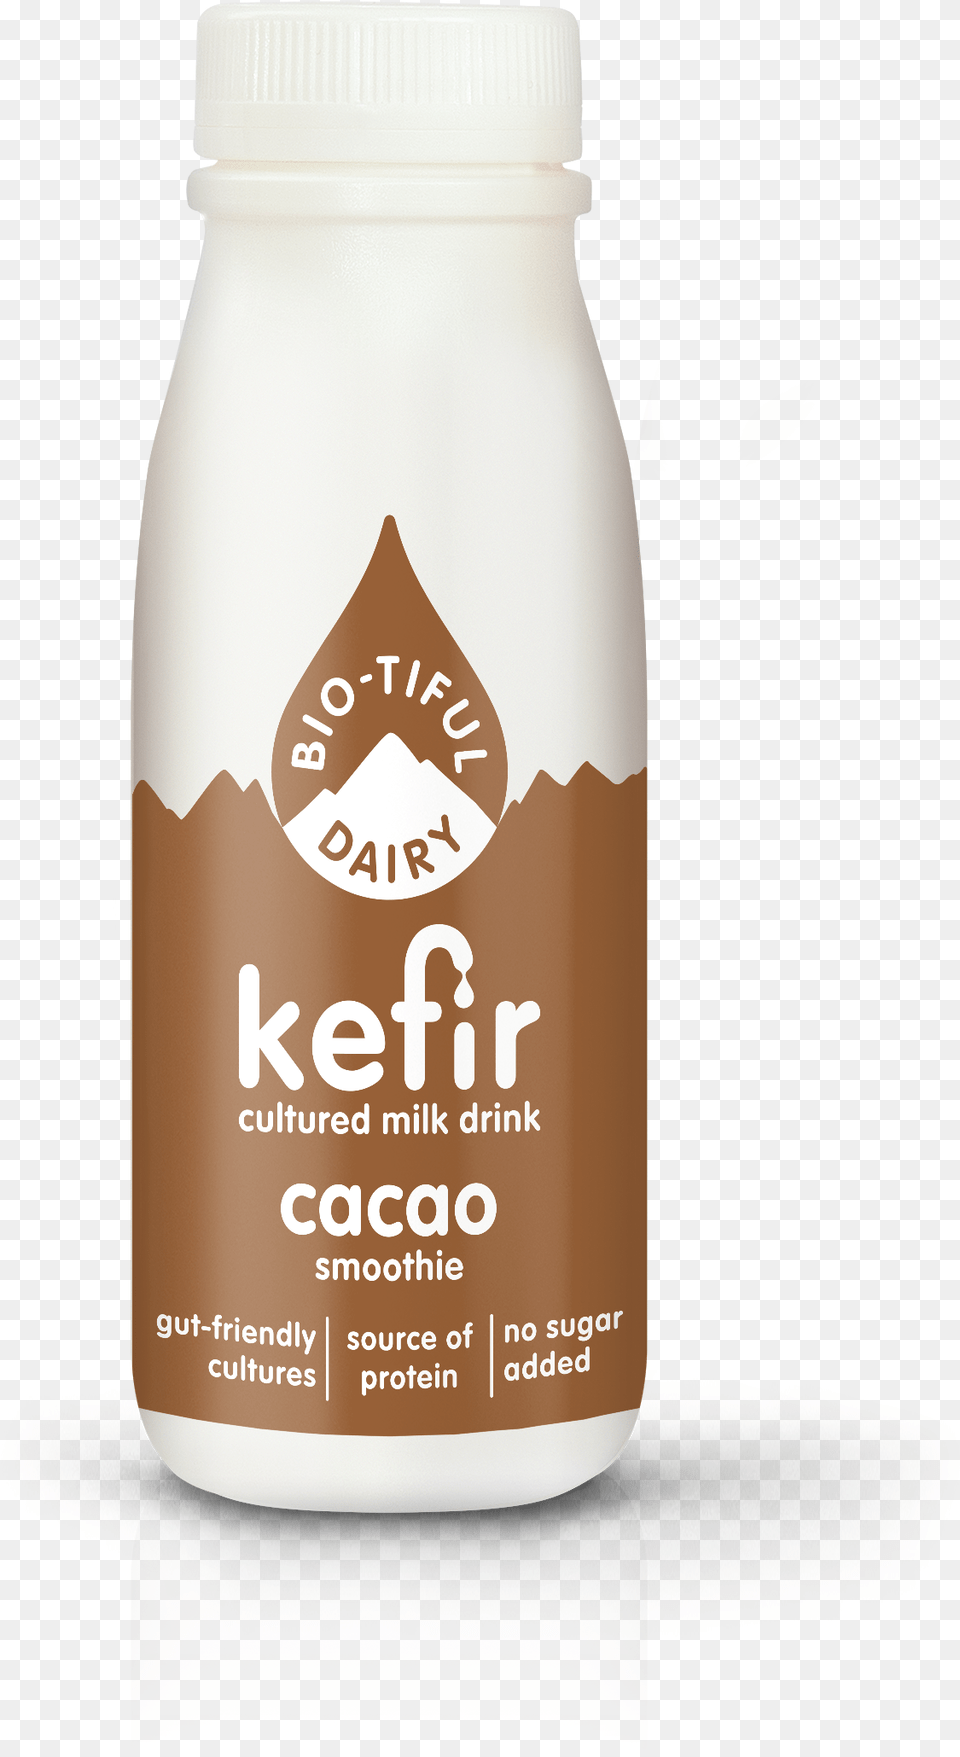 Cacao Chocolate Milk, Beverage, Dairy, Food, Bottle Png Image